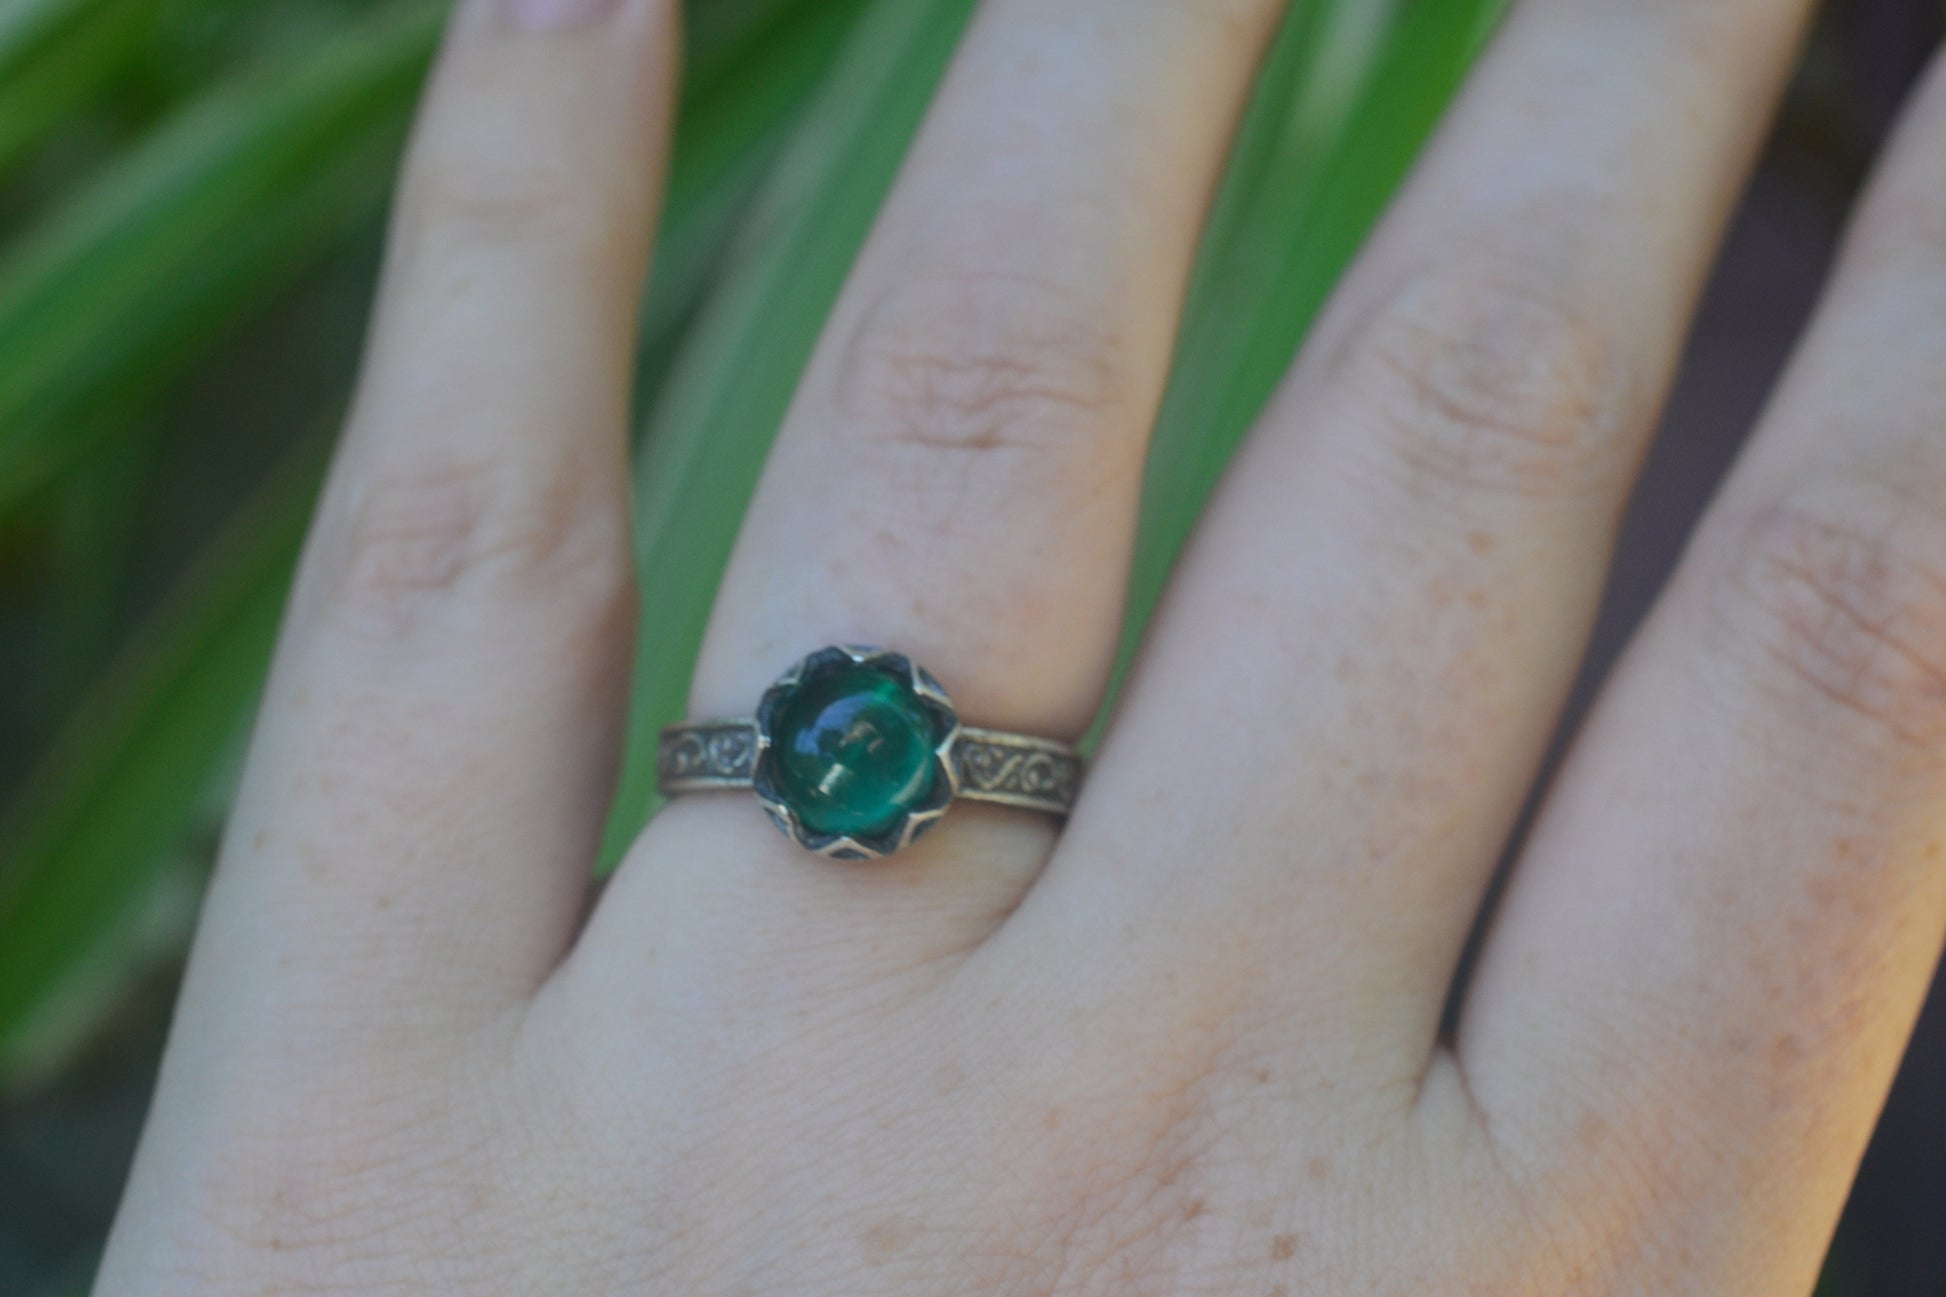 8mm Round Emerald Cabochon Ring in Silver